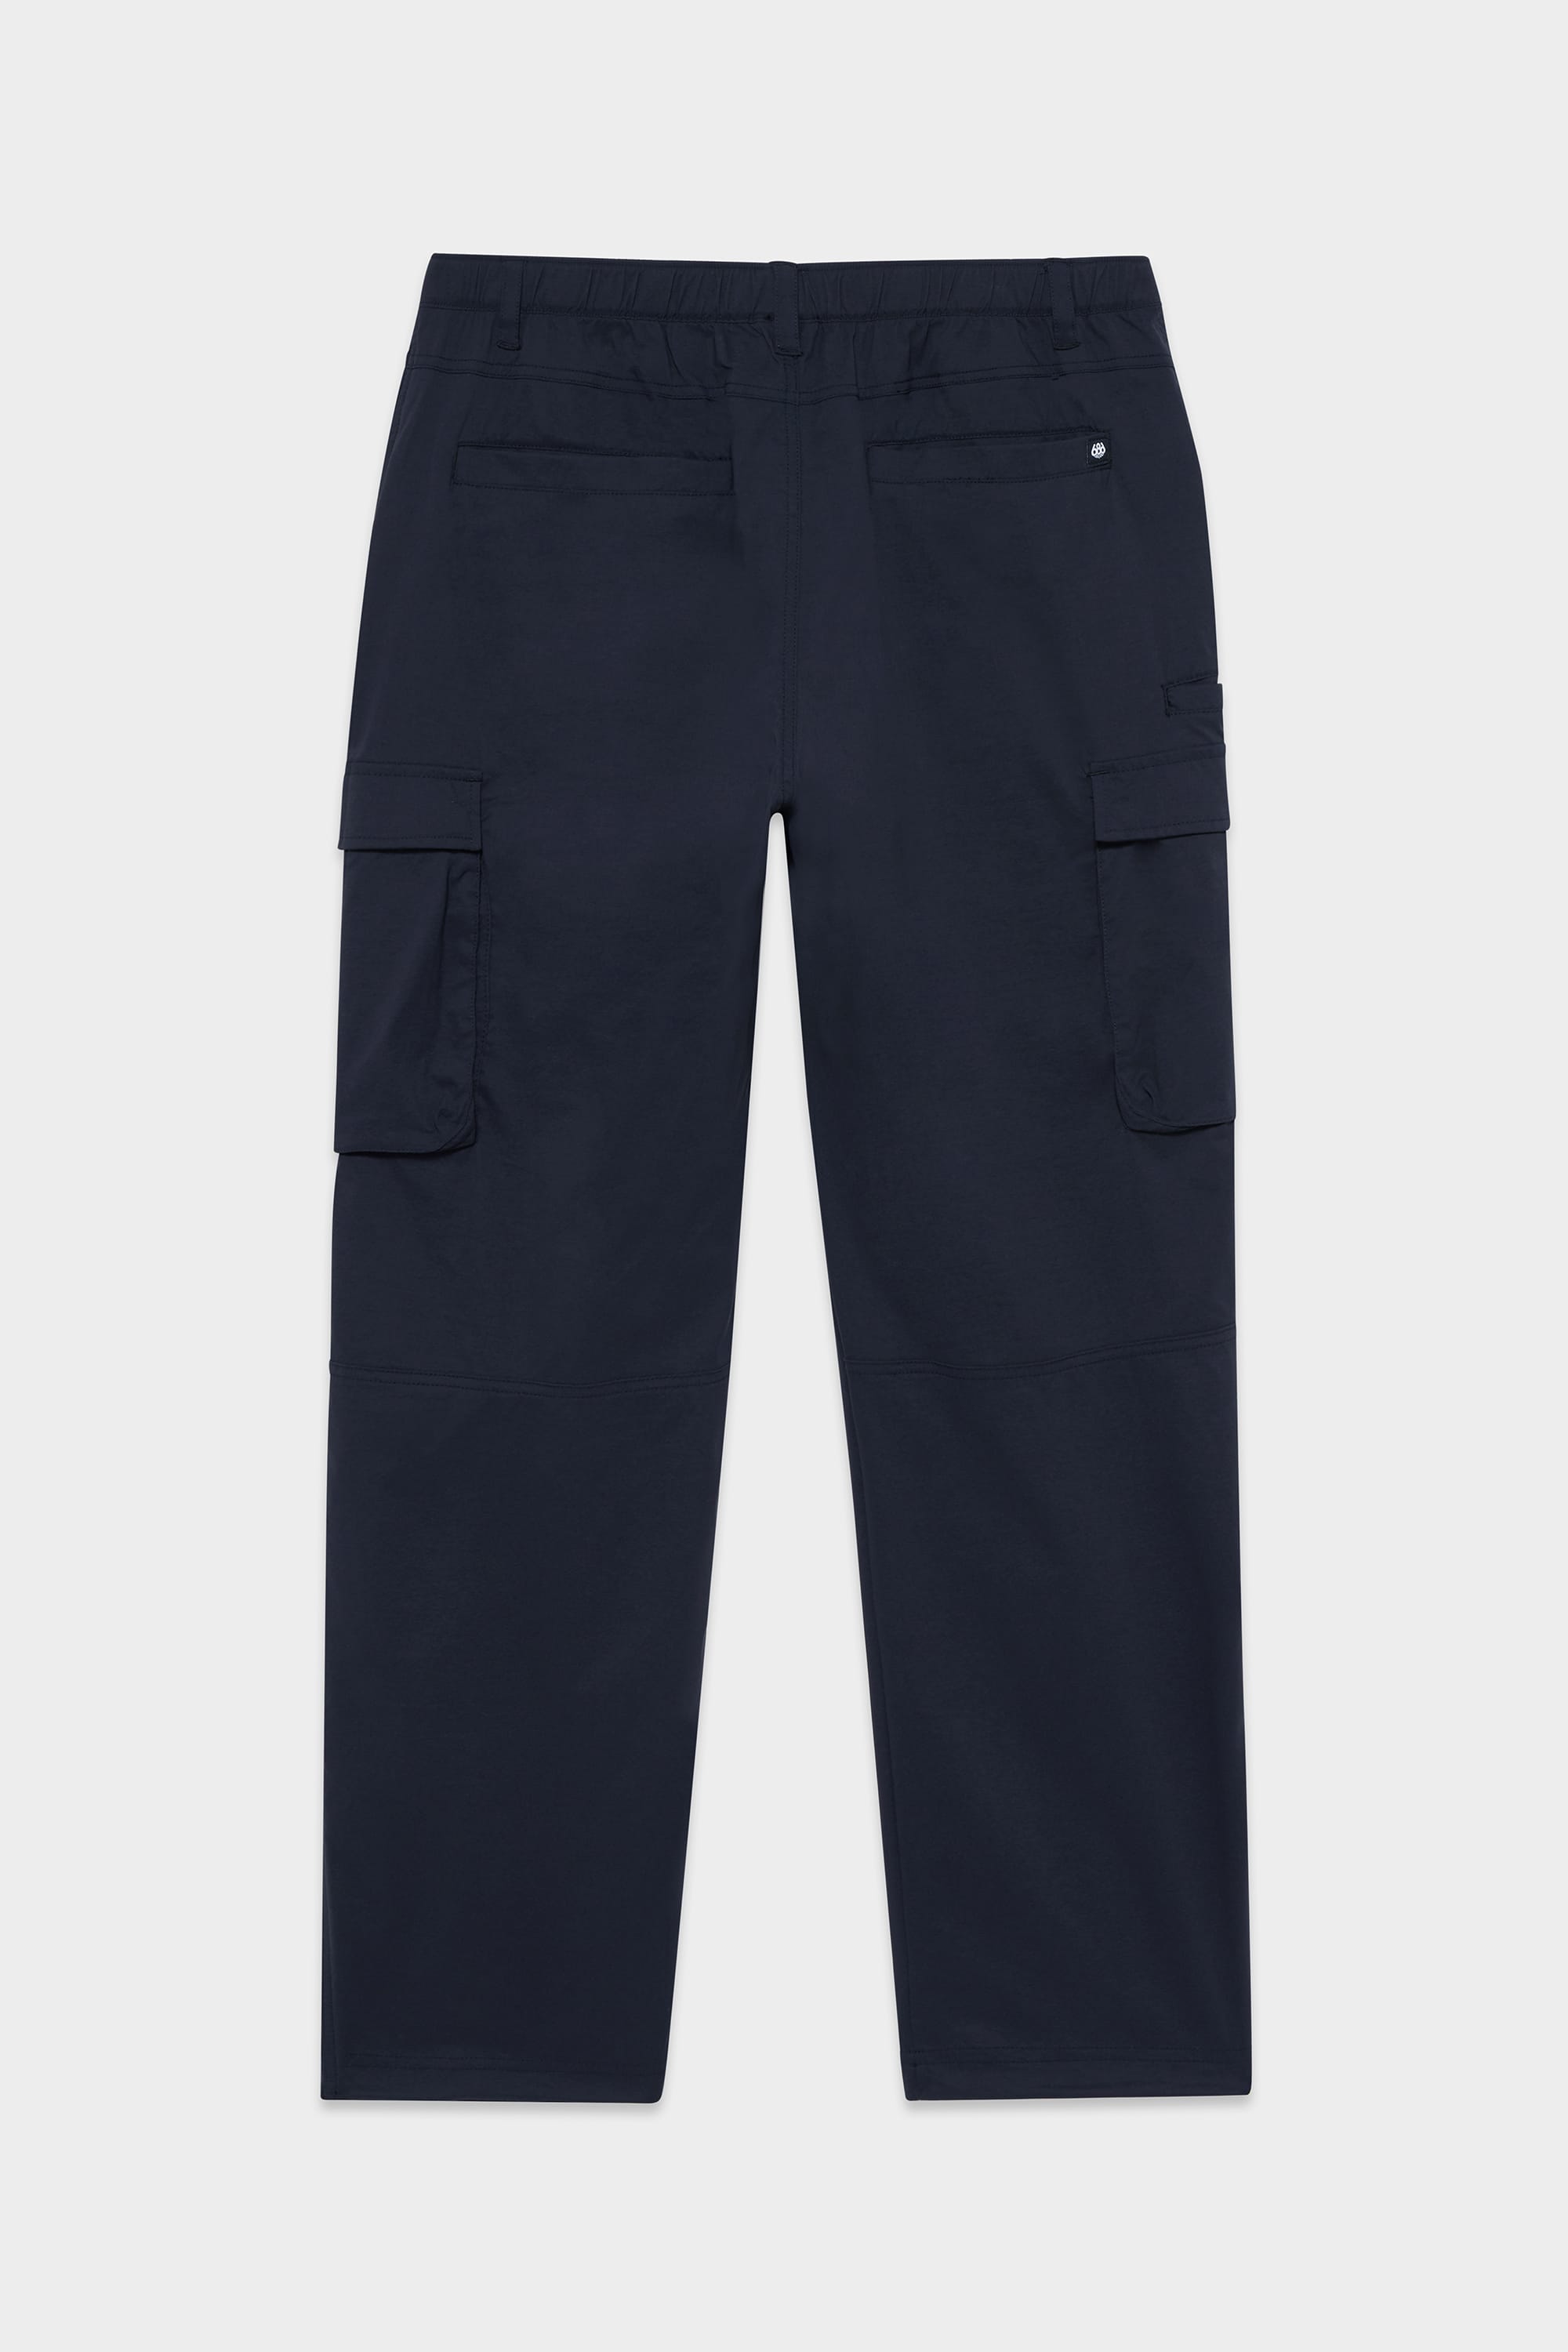 Solid Men Blue Cotton Cargo Pant, Loose Fit at Rs 450/piece in Bhiwandi |  ID: 2852579501697